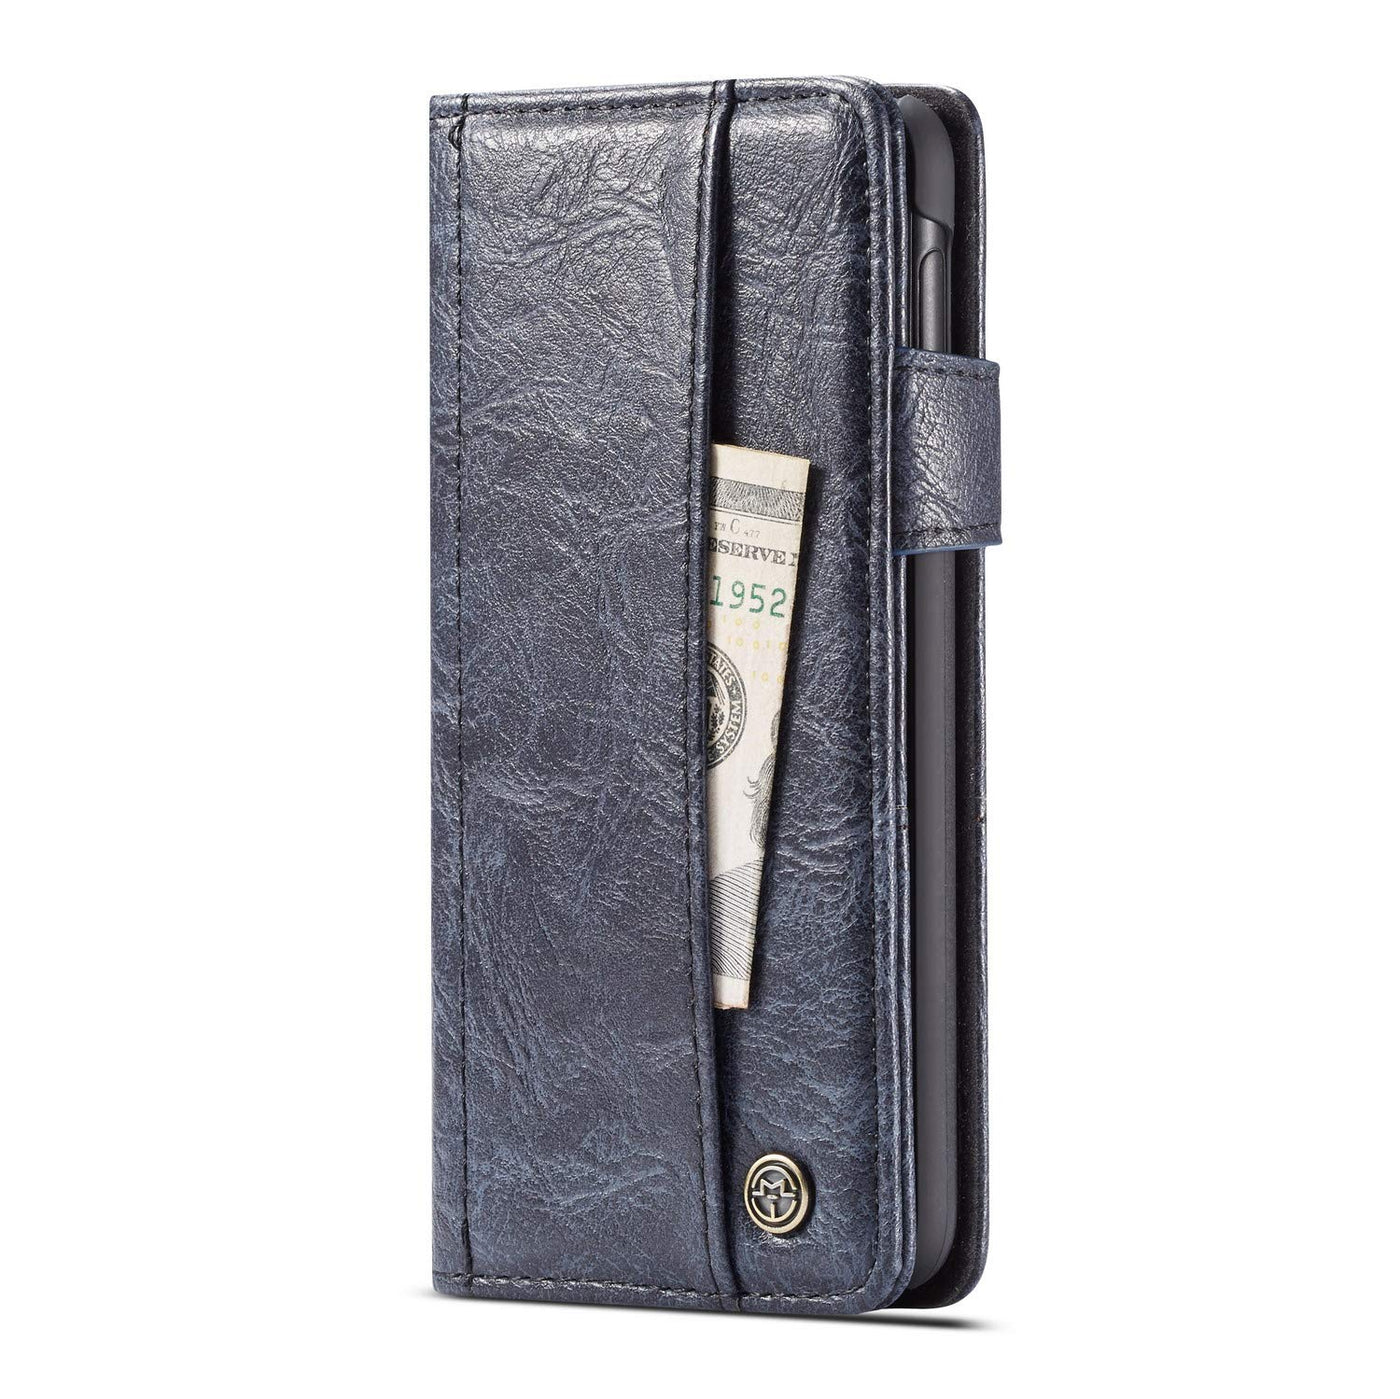 Excelsior Premium Leather Wallet flip Cover Case For Samsung Galaxy S10e (2019)